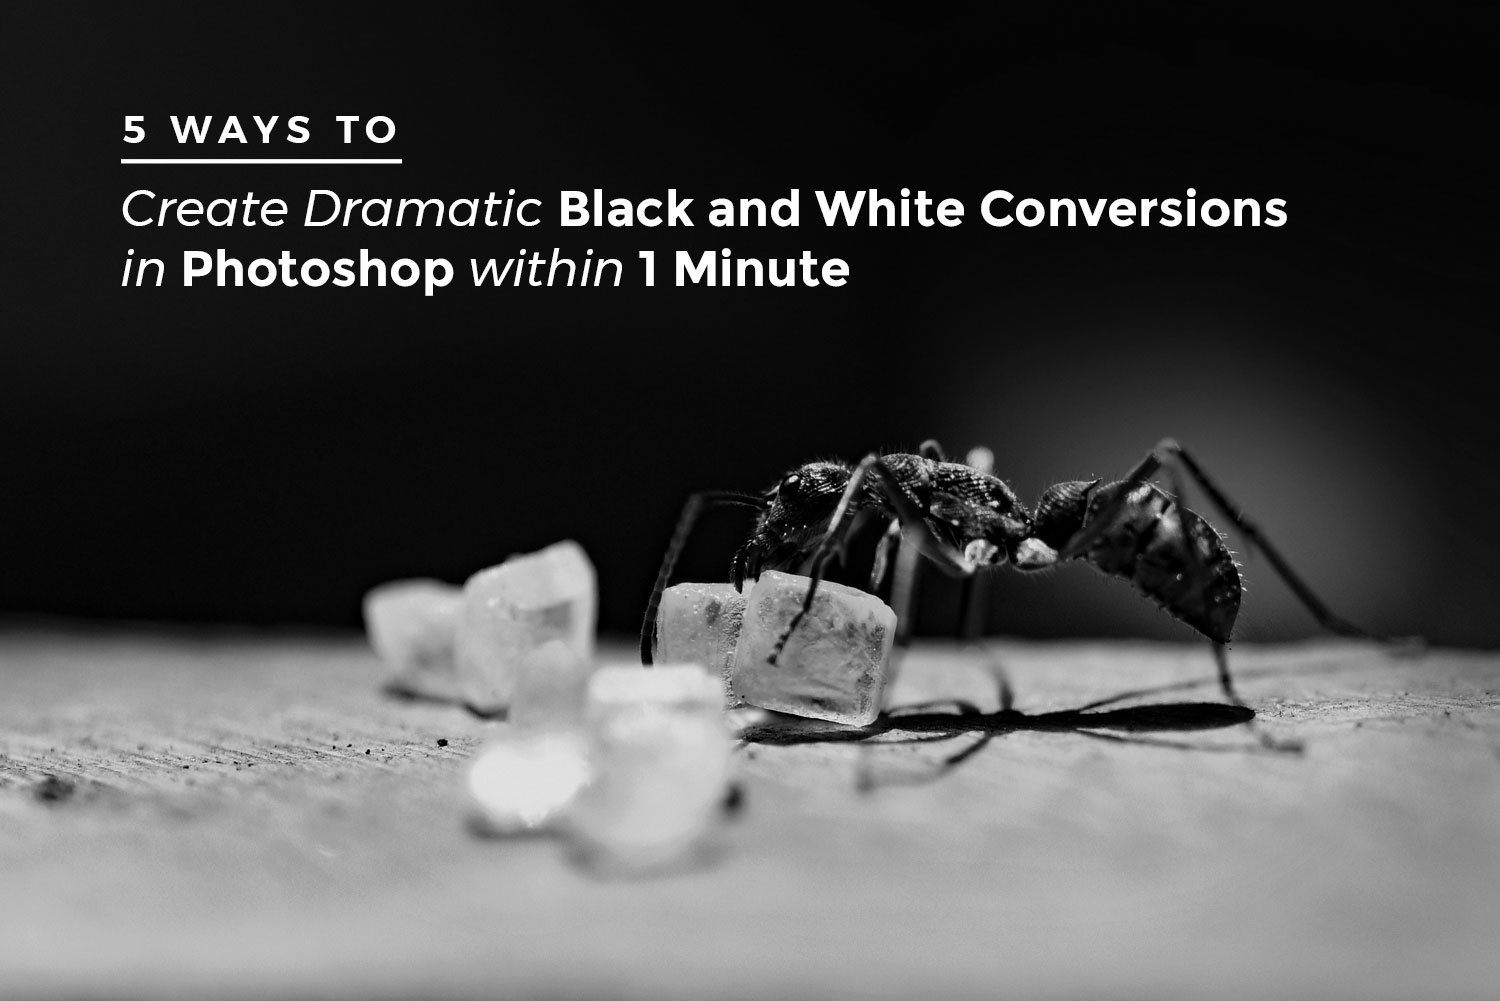 5 Ways to Create Dramatic Black and White Conversions in Photoshop in 1 Minute